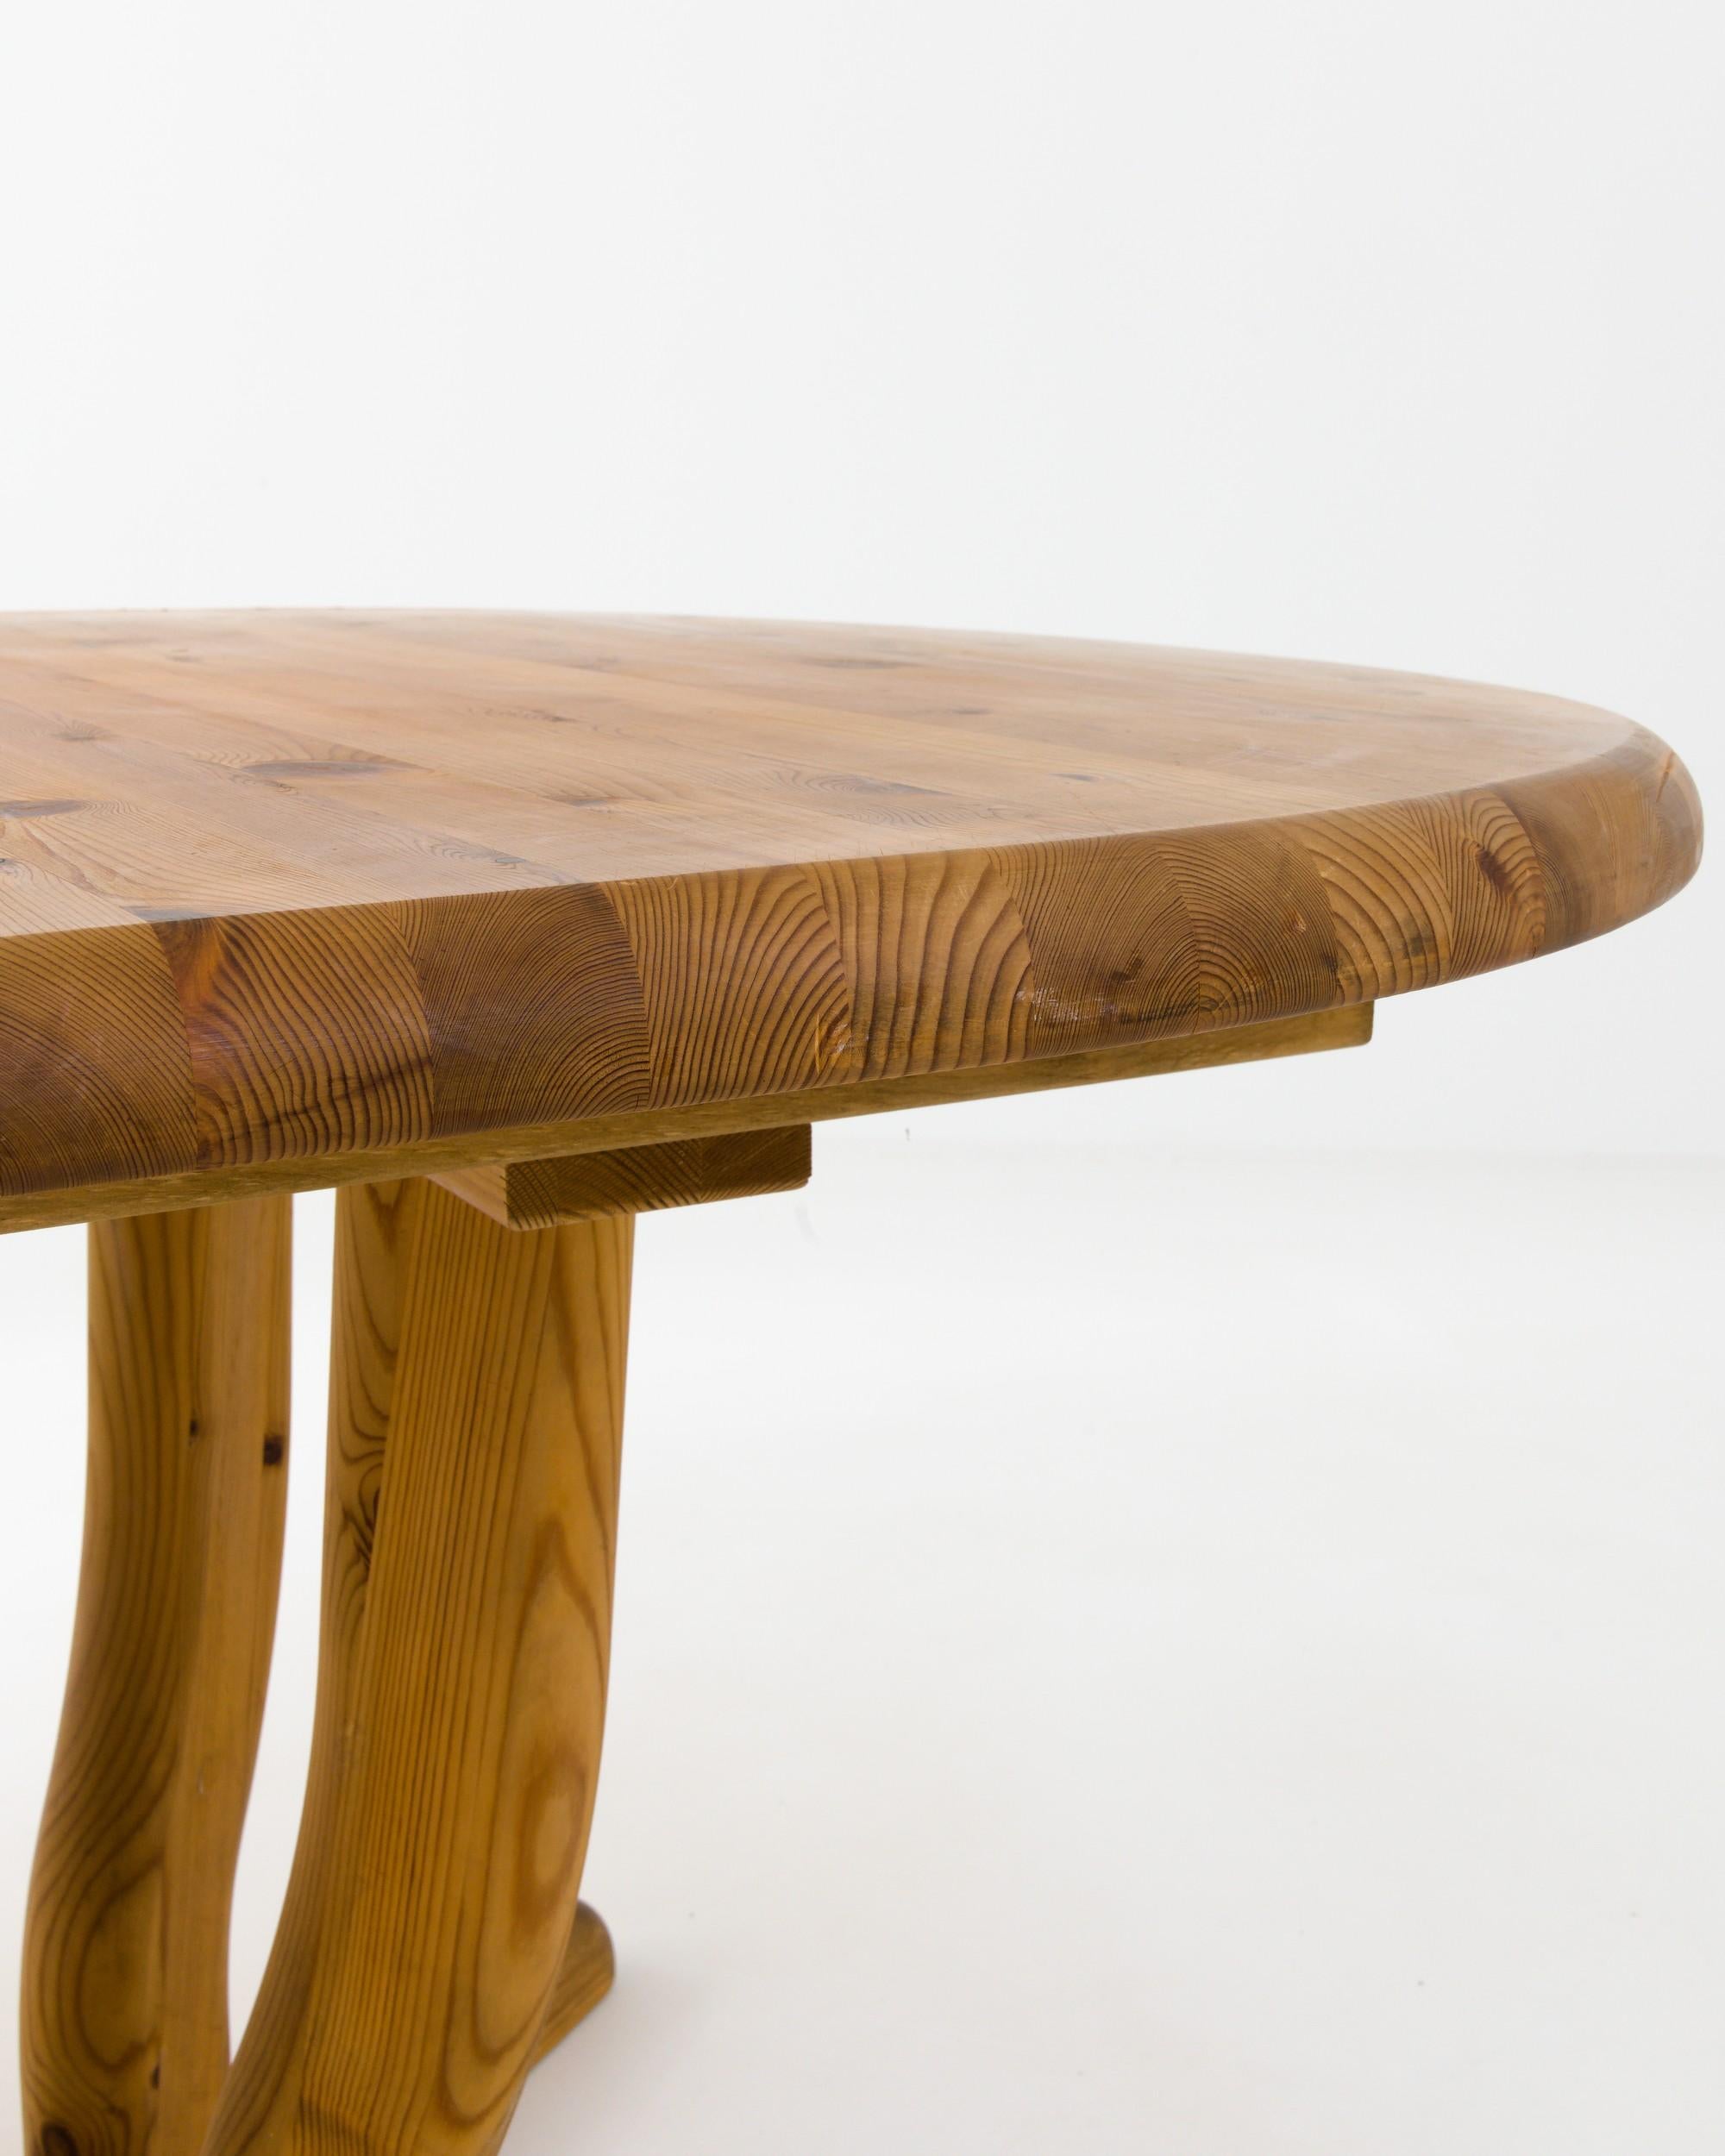 20th Century Scandinavian Wooden Extendable Dining Table For Sale 9